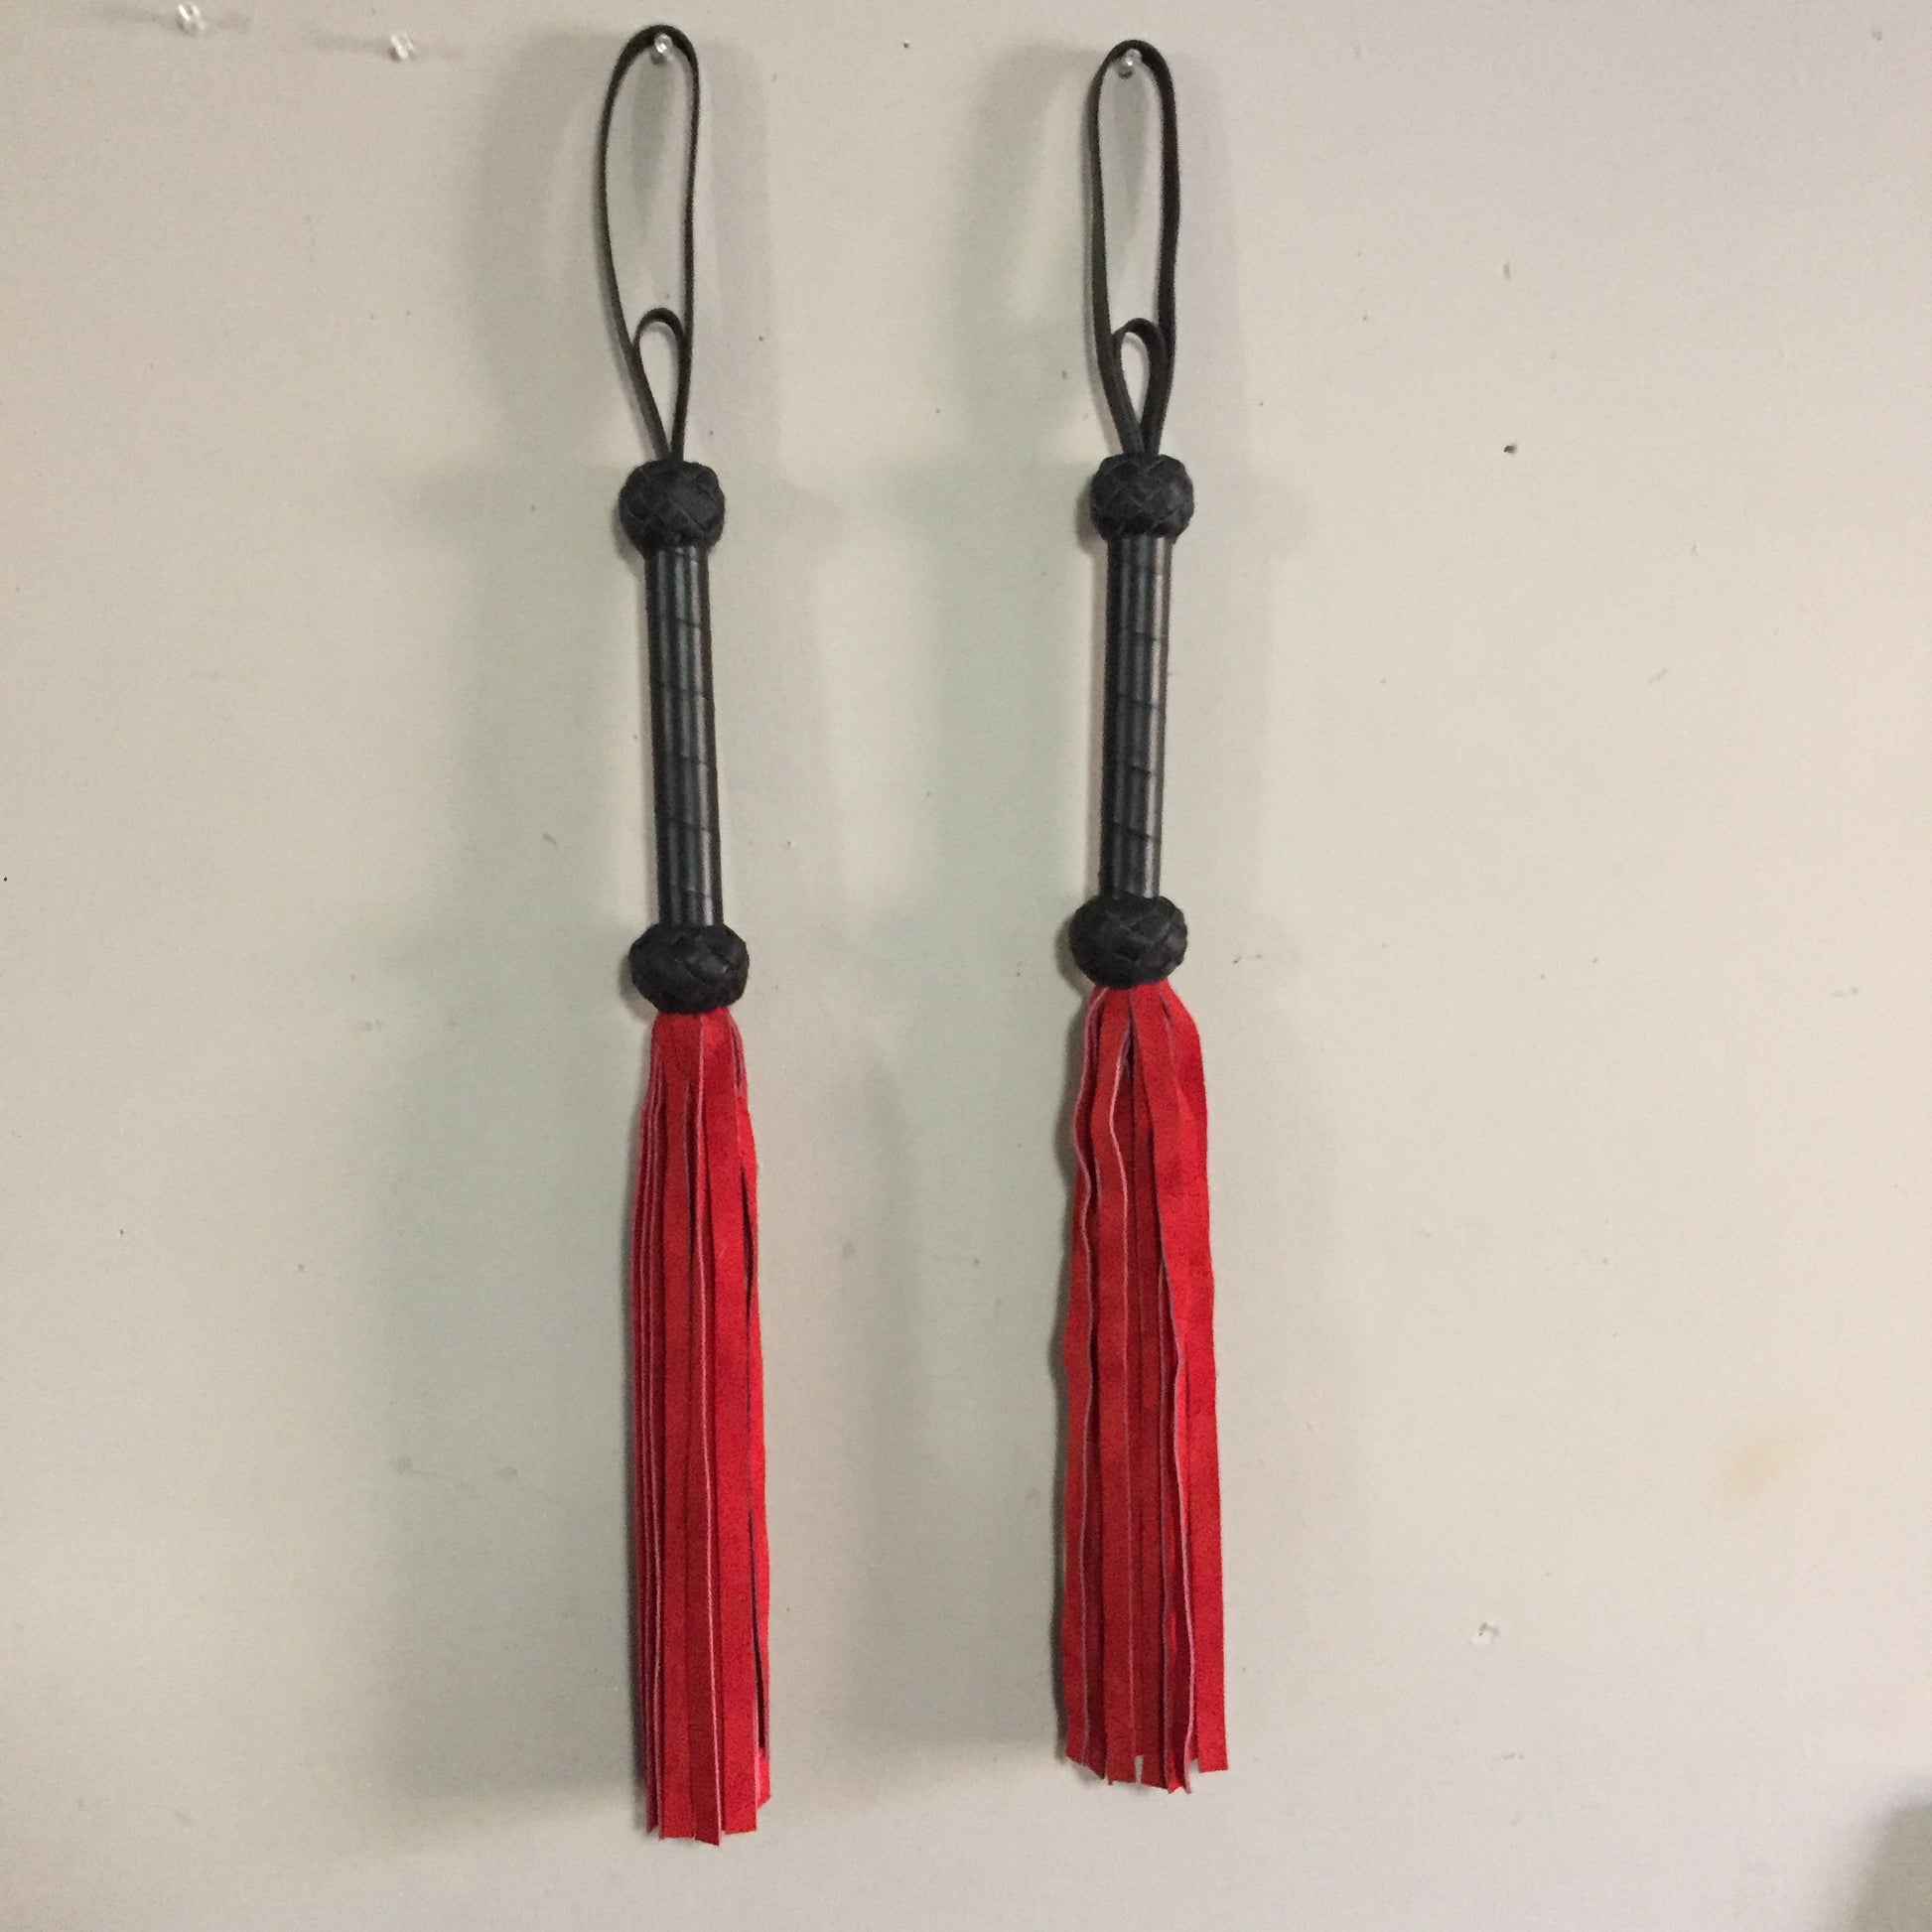 A pair of Red Basic Suede Floggers.